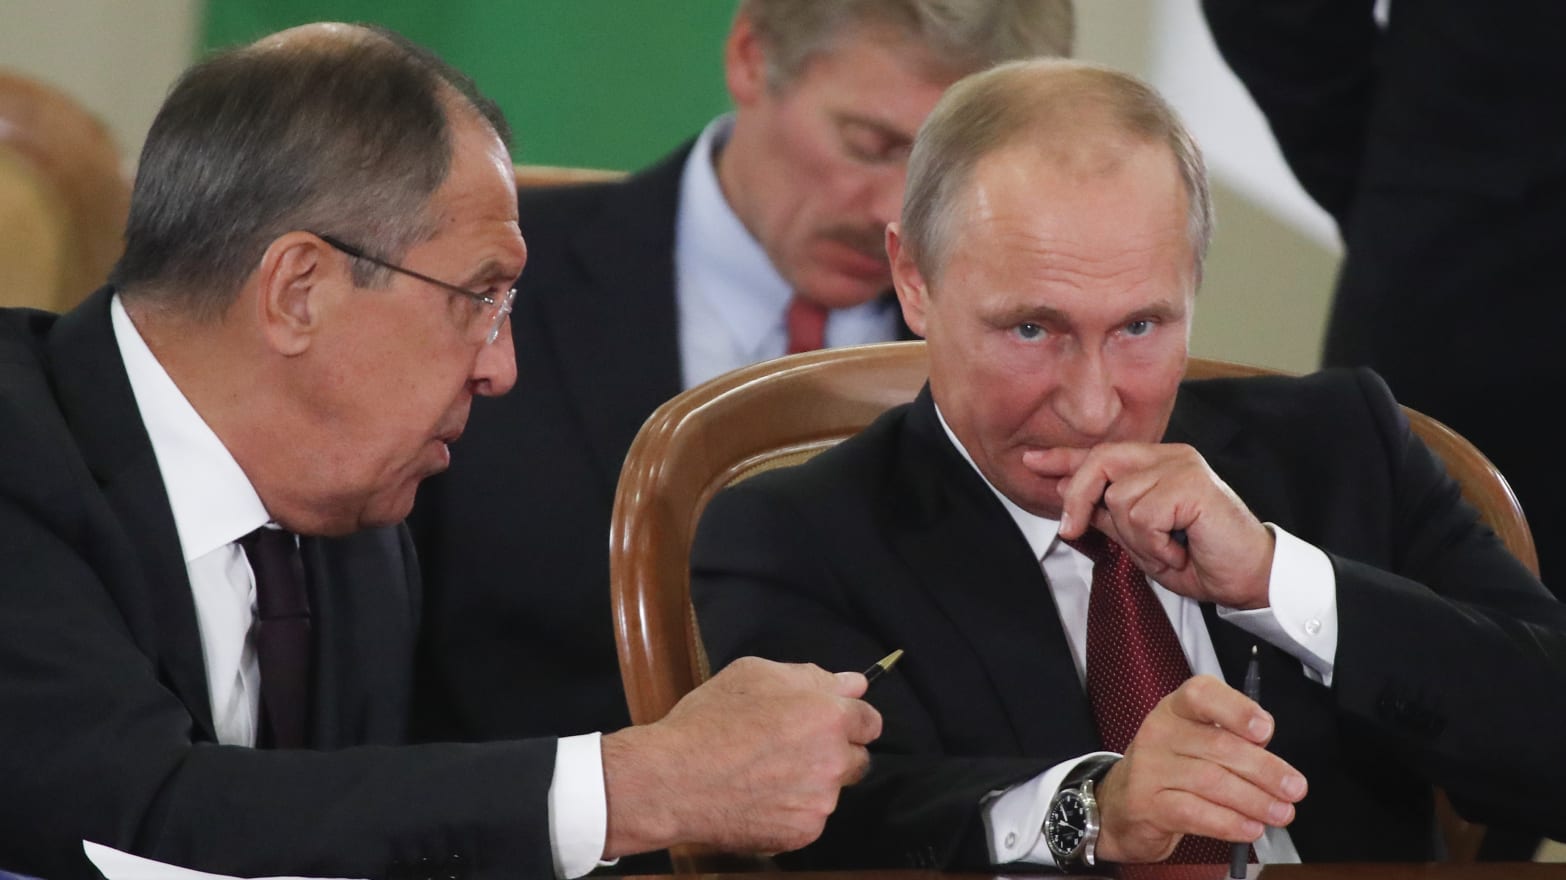 Russia's President Vladimir Putin and Foreign Minister Sergei Lavrov seated at a table.